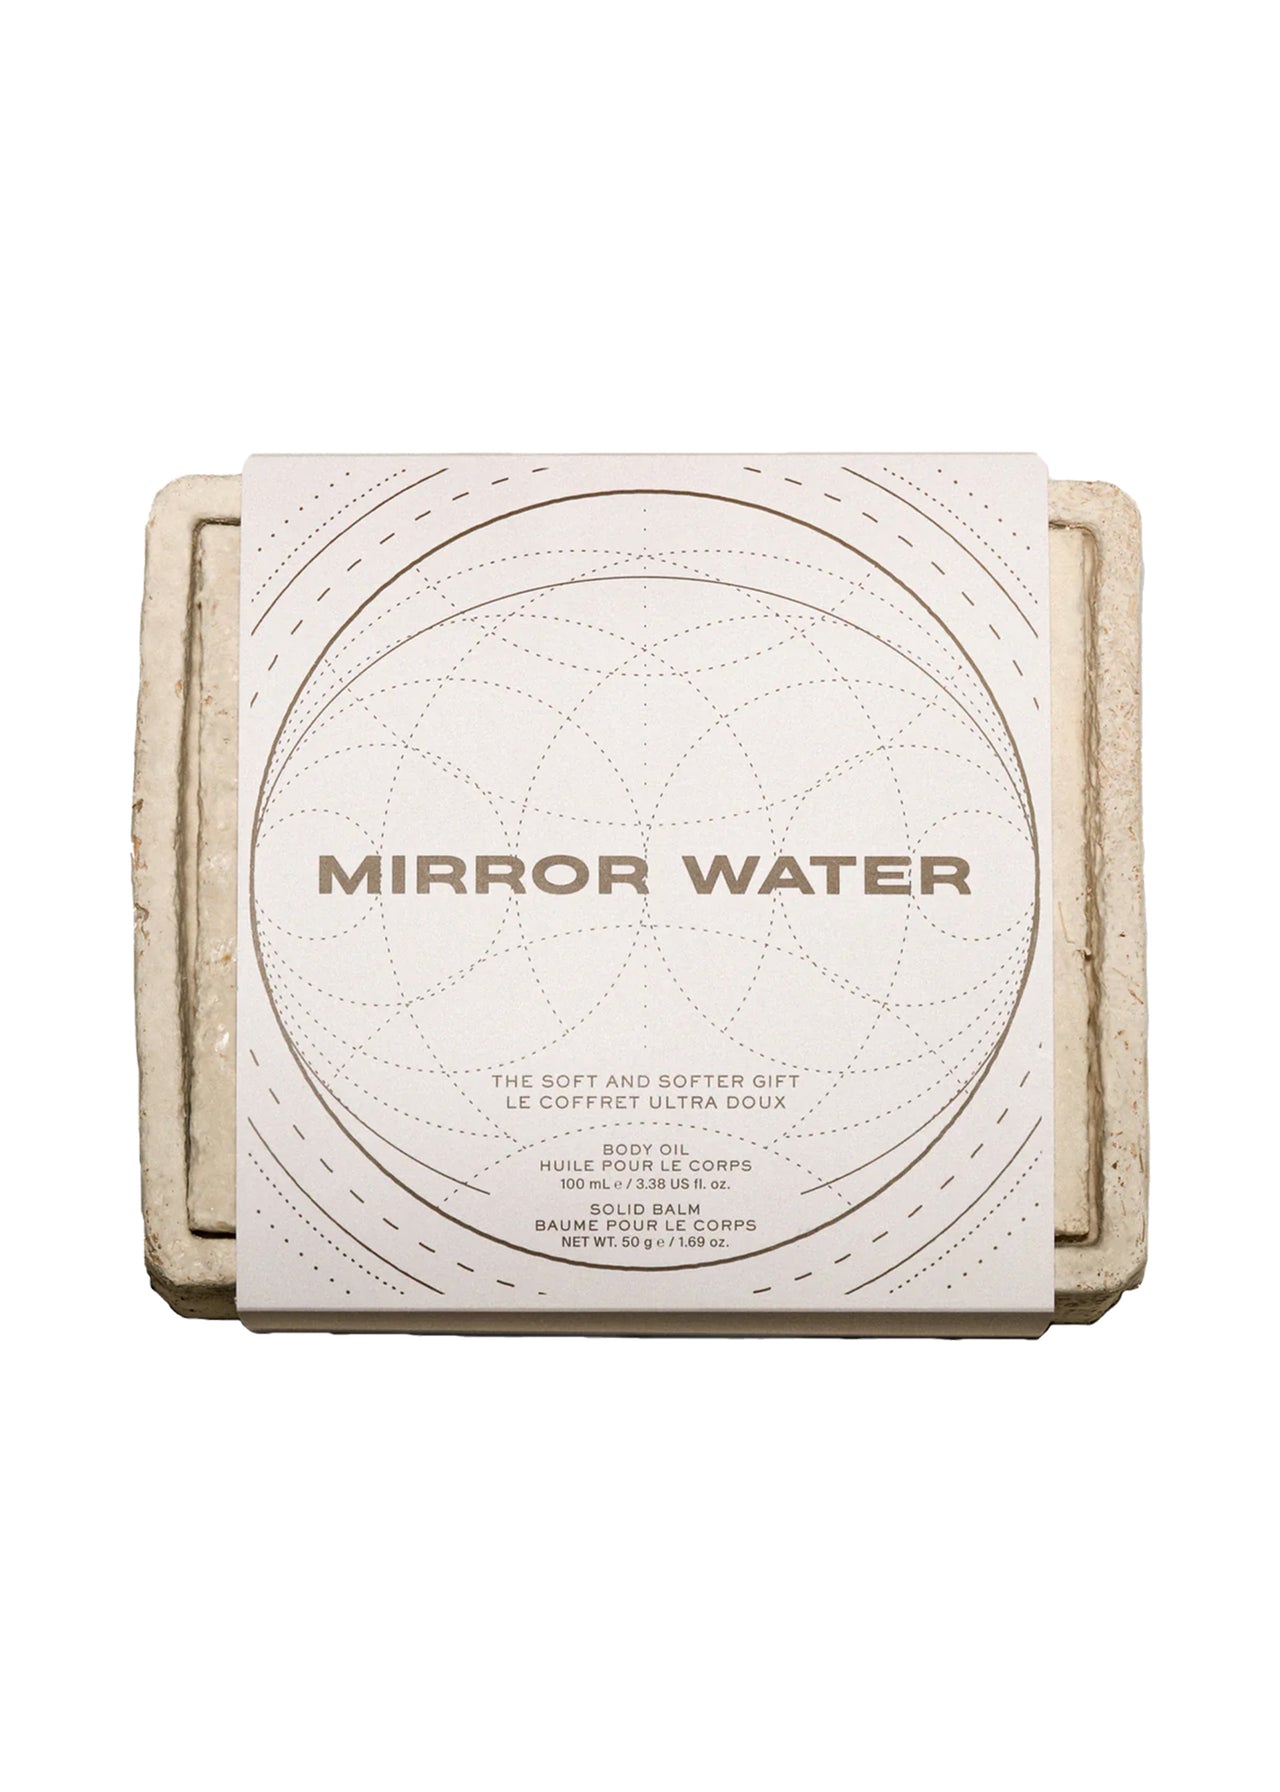 MIRROR WATER The Soft and Softer Gift